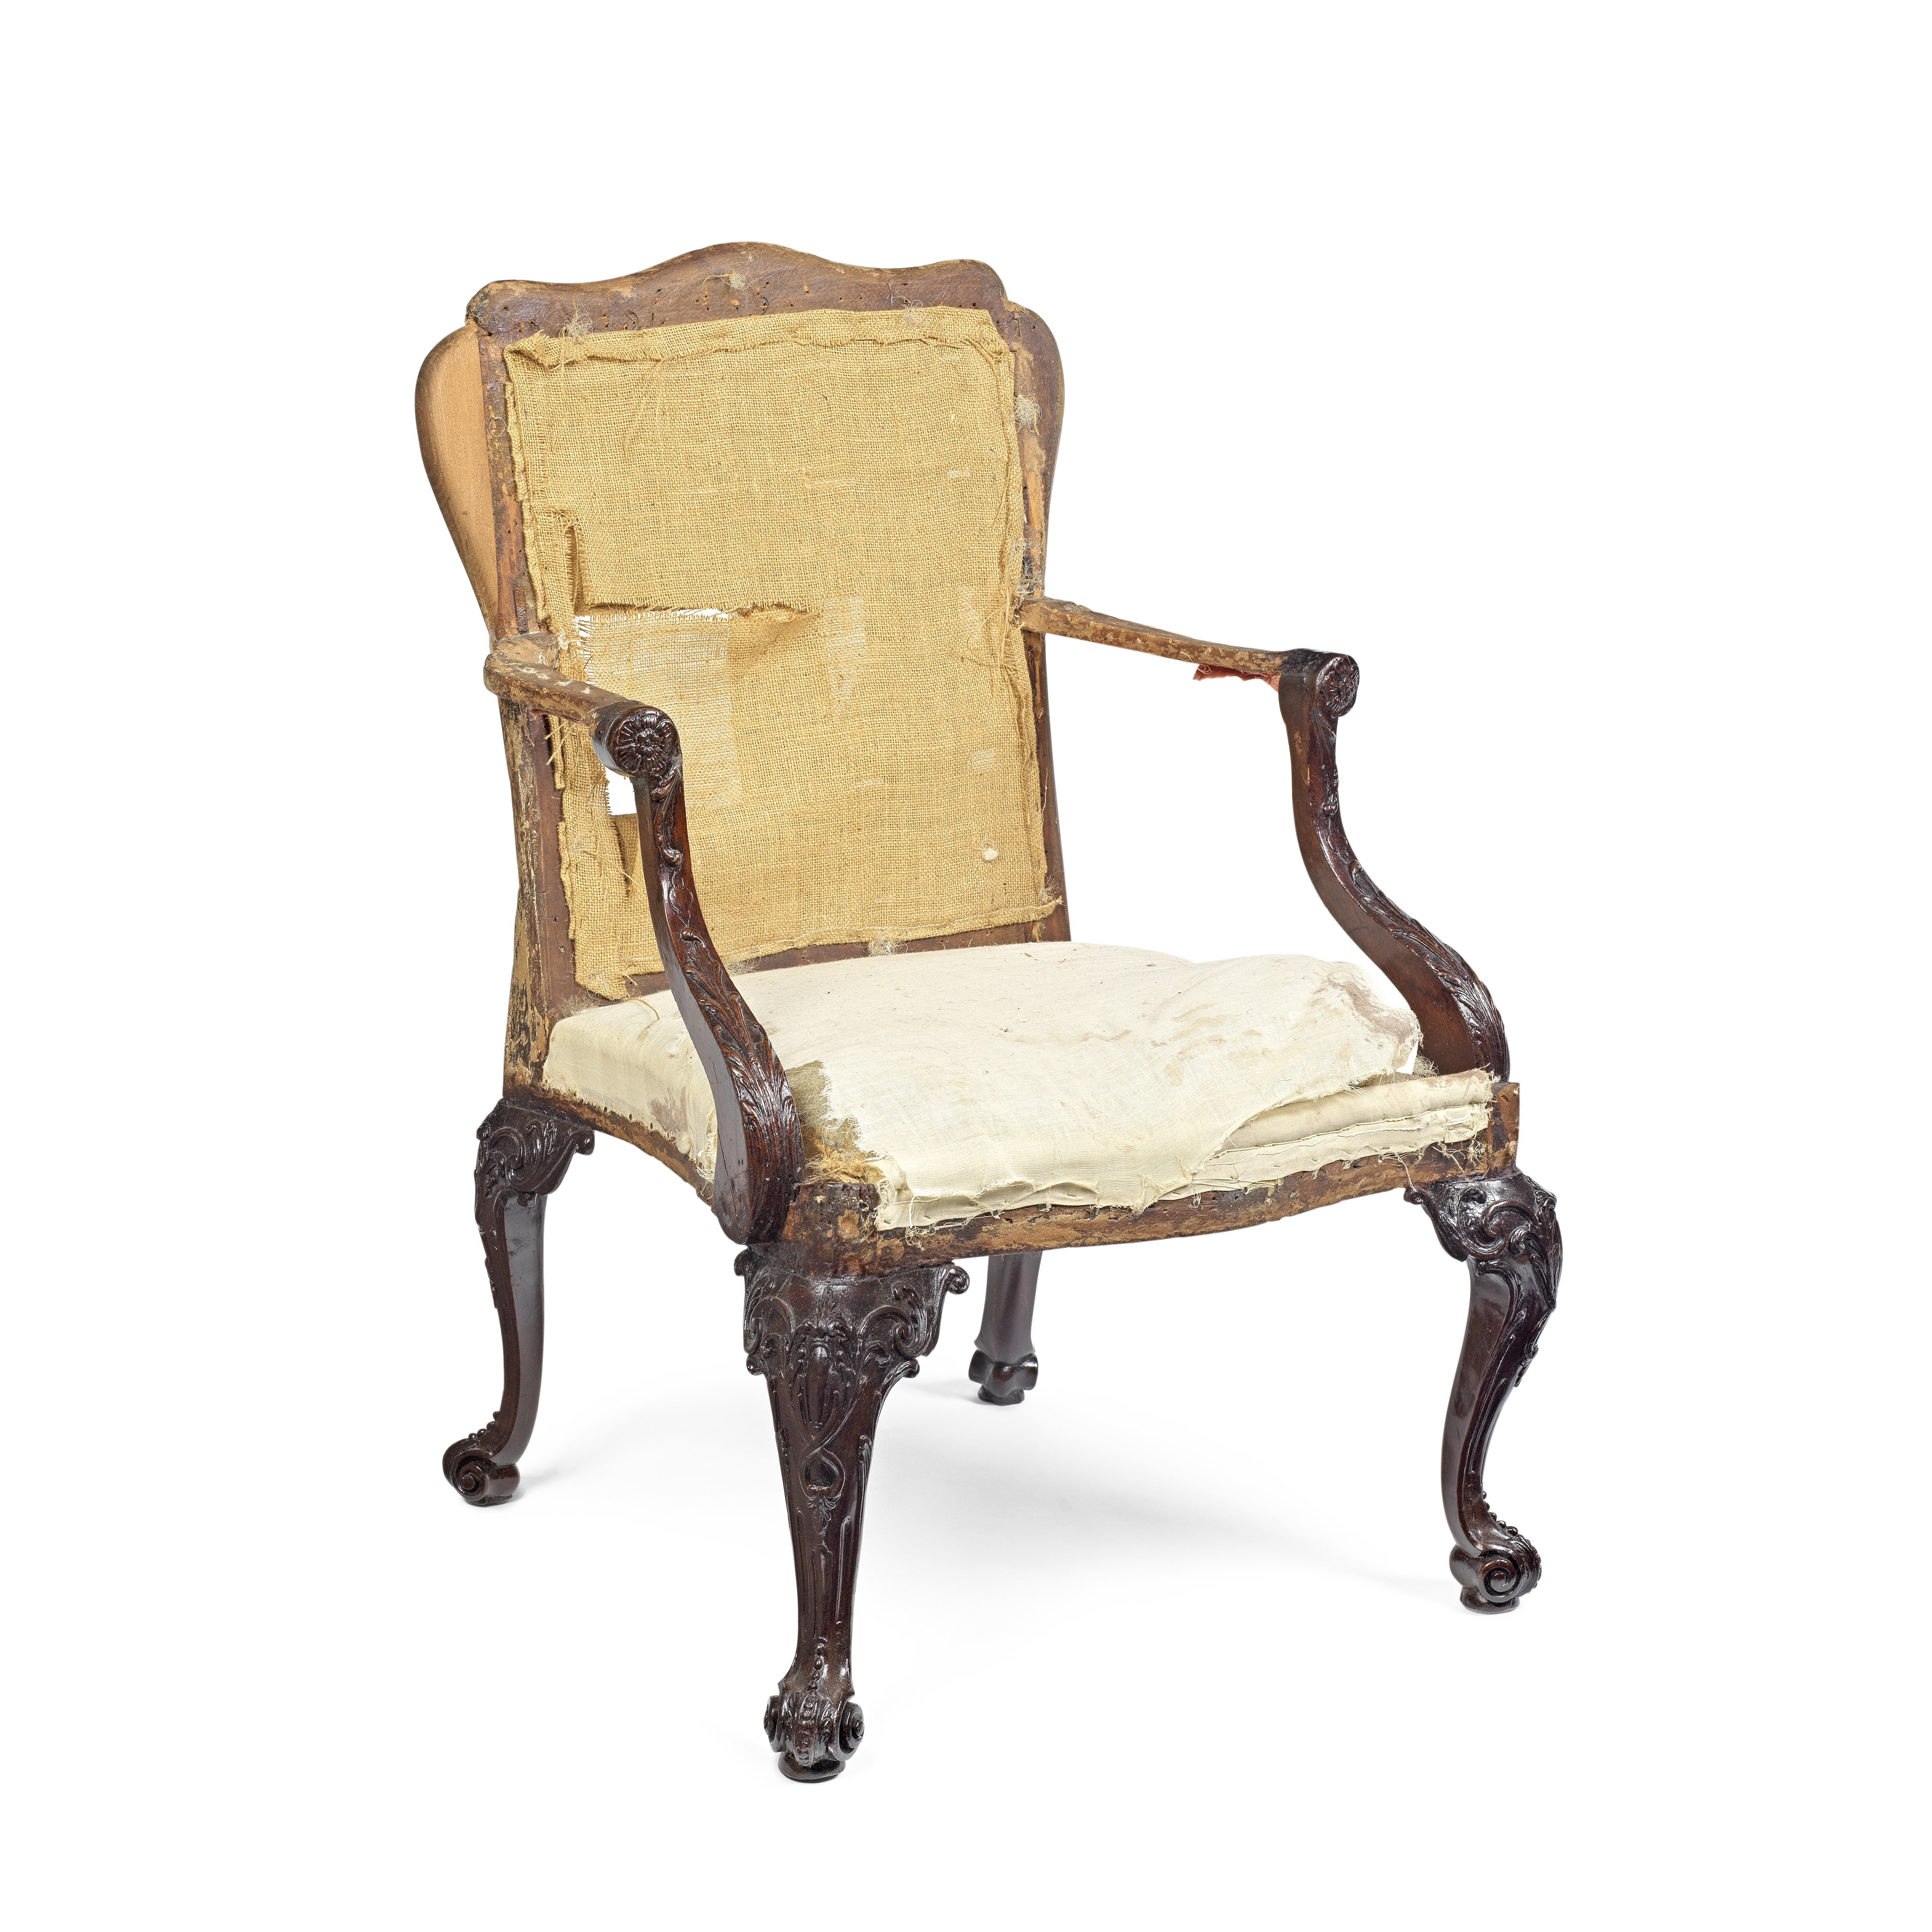 A CARVED MAHOGANY OPEN ARMCHAIRIn the manner of Wright and Elwrick, probably 18th century